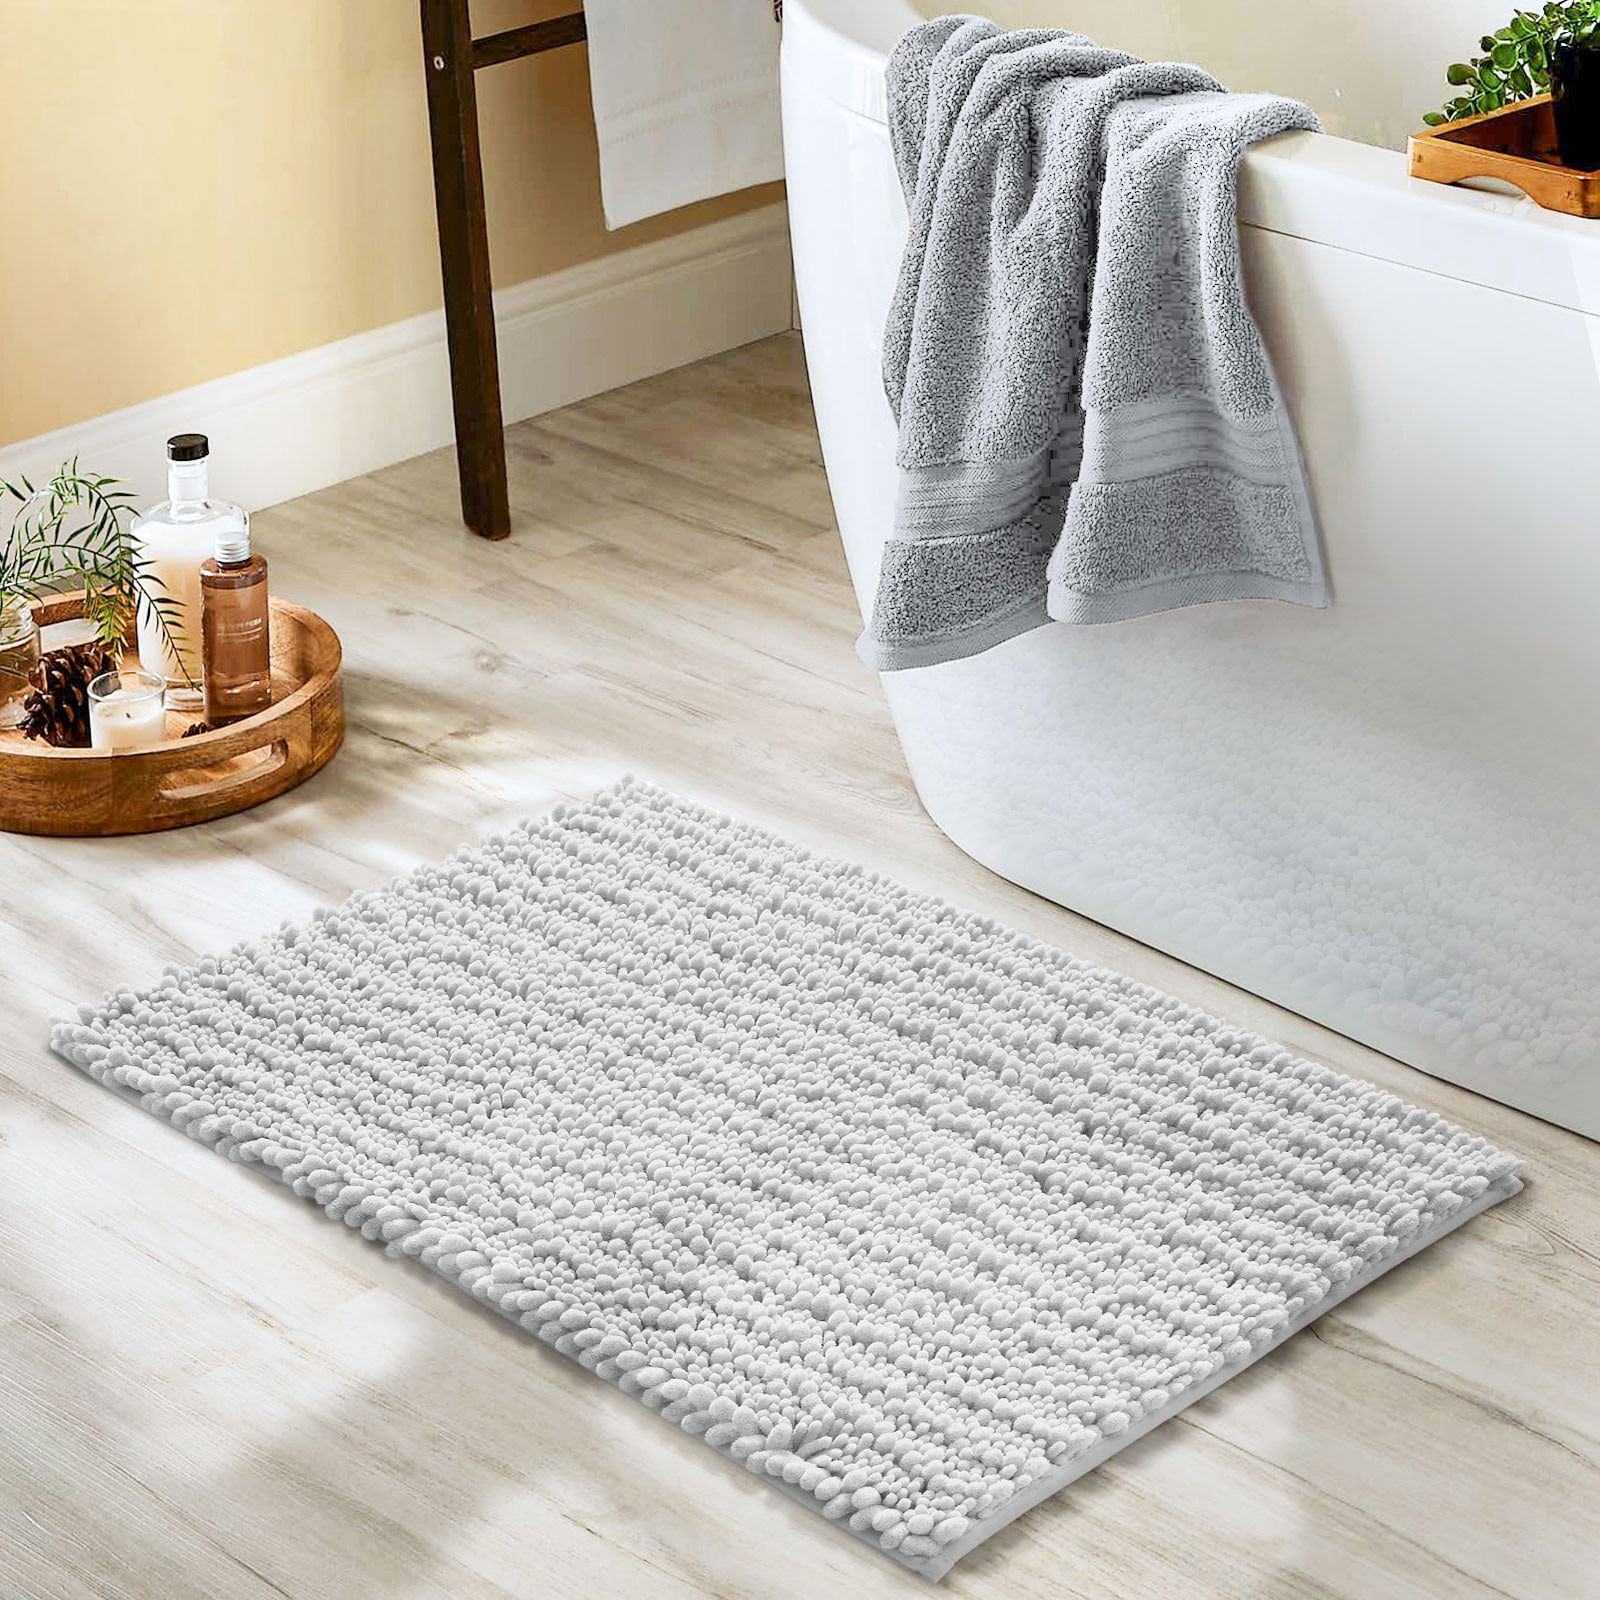 Color&Geometry White Chenille Bathroom Rugs- Non Slip, Absorbent, Quick  Dry, Thin, Machine Washable- 16x24 Small Bath Mat Carpet Bath Rugs for